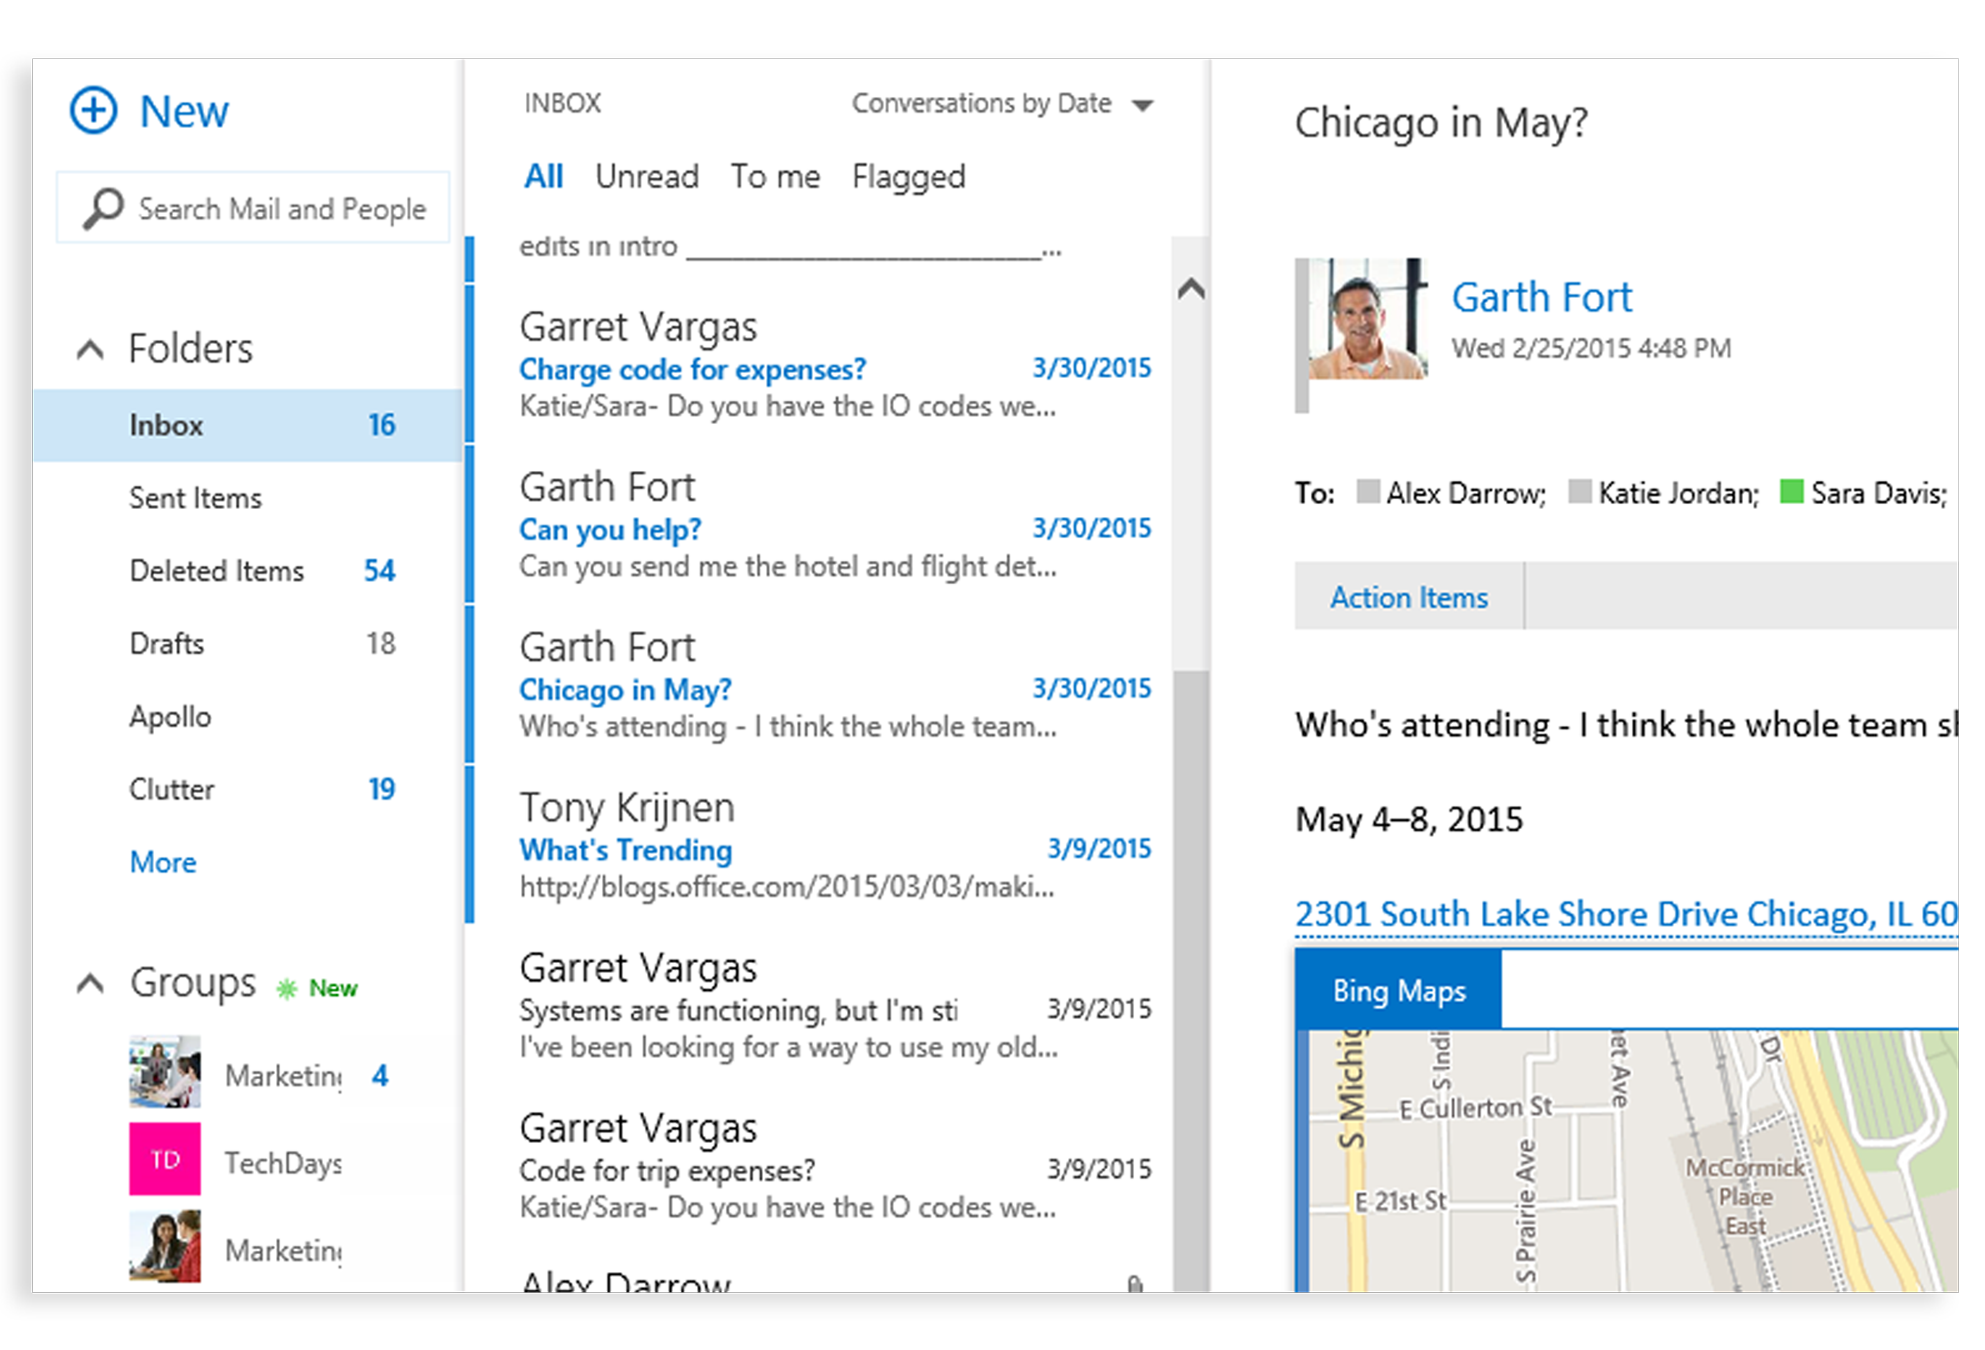 Partial screenshot of an Outlook inbox showing a Bing map within an email message